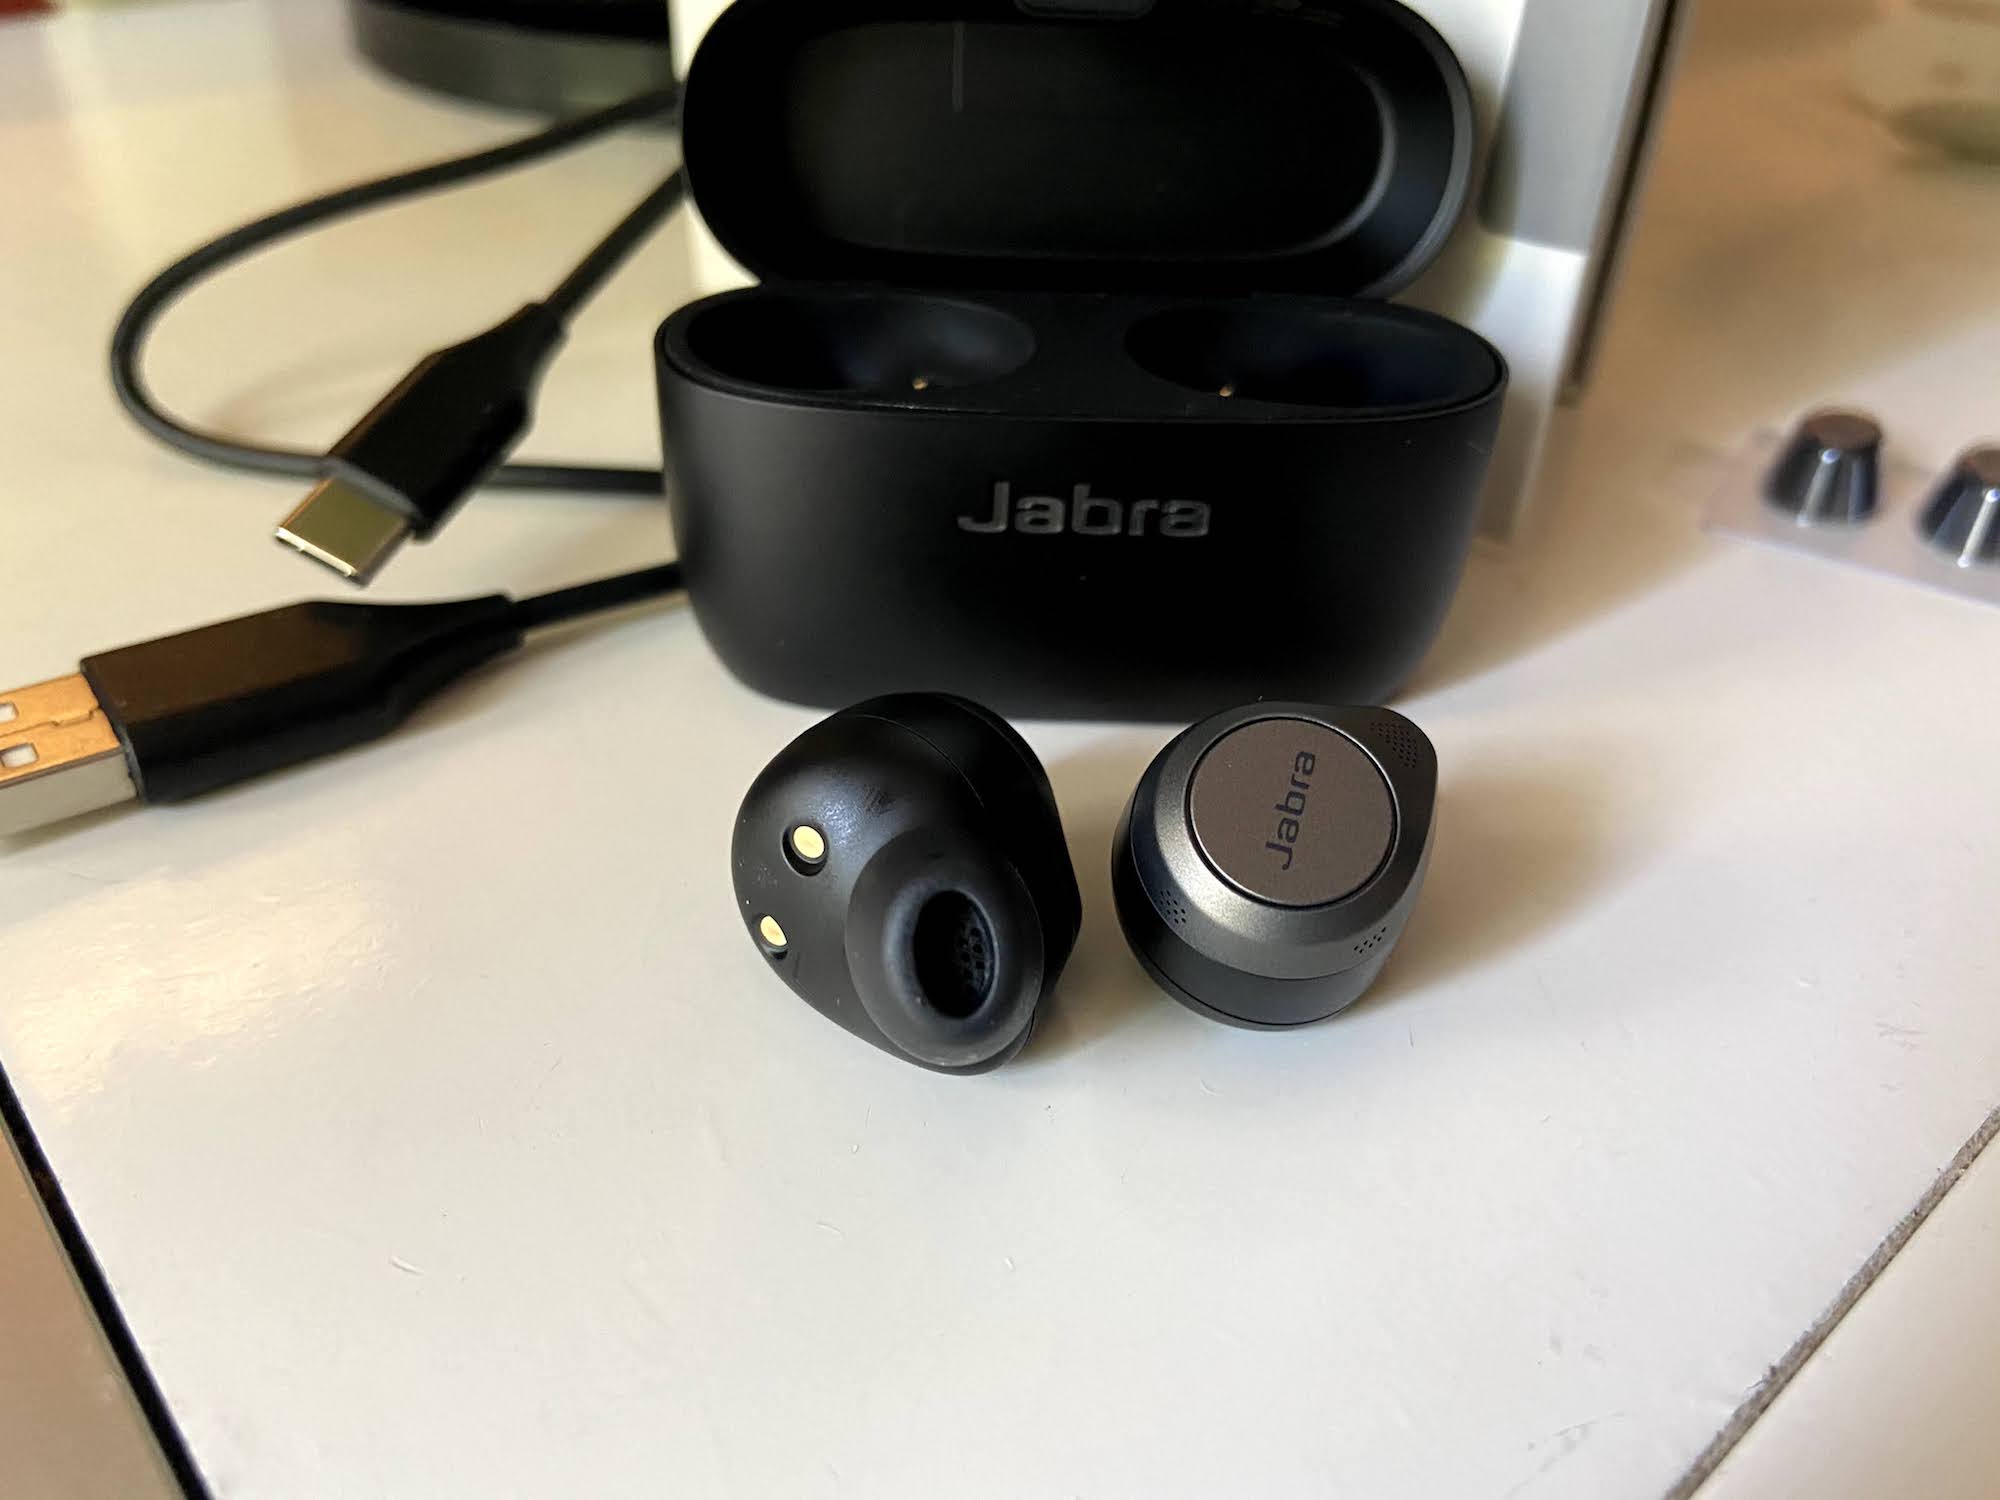 Jabra 85t review: These capable earbuds don't skimp on active-noise  canceling